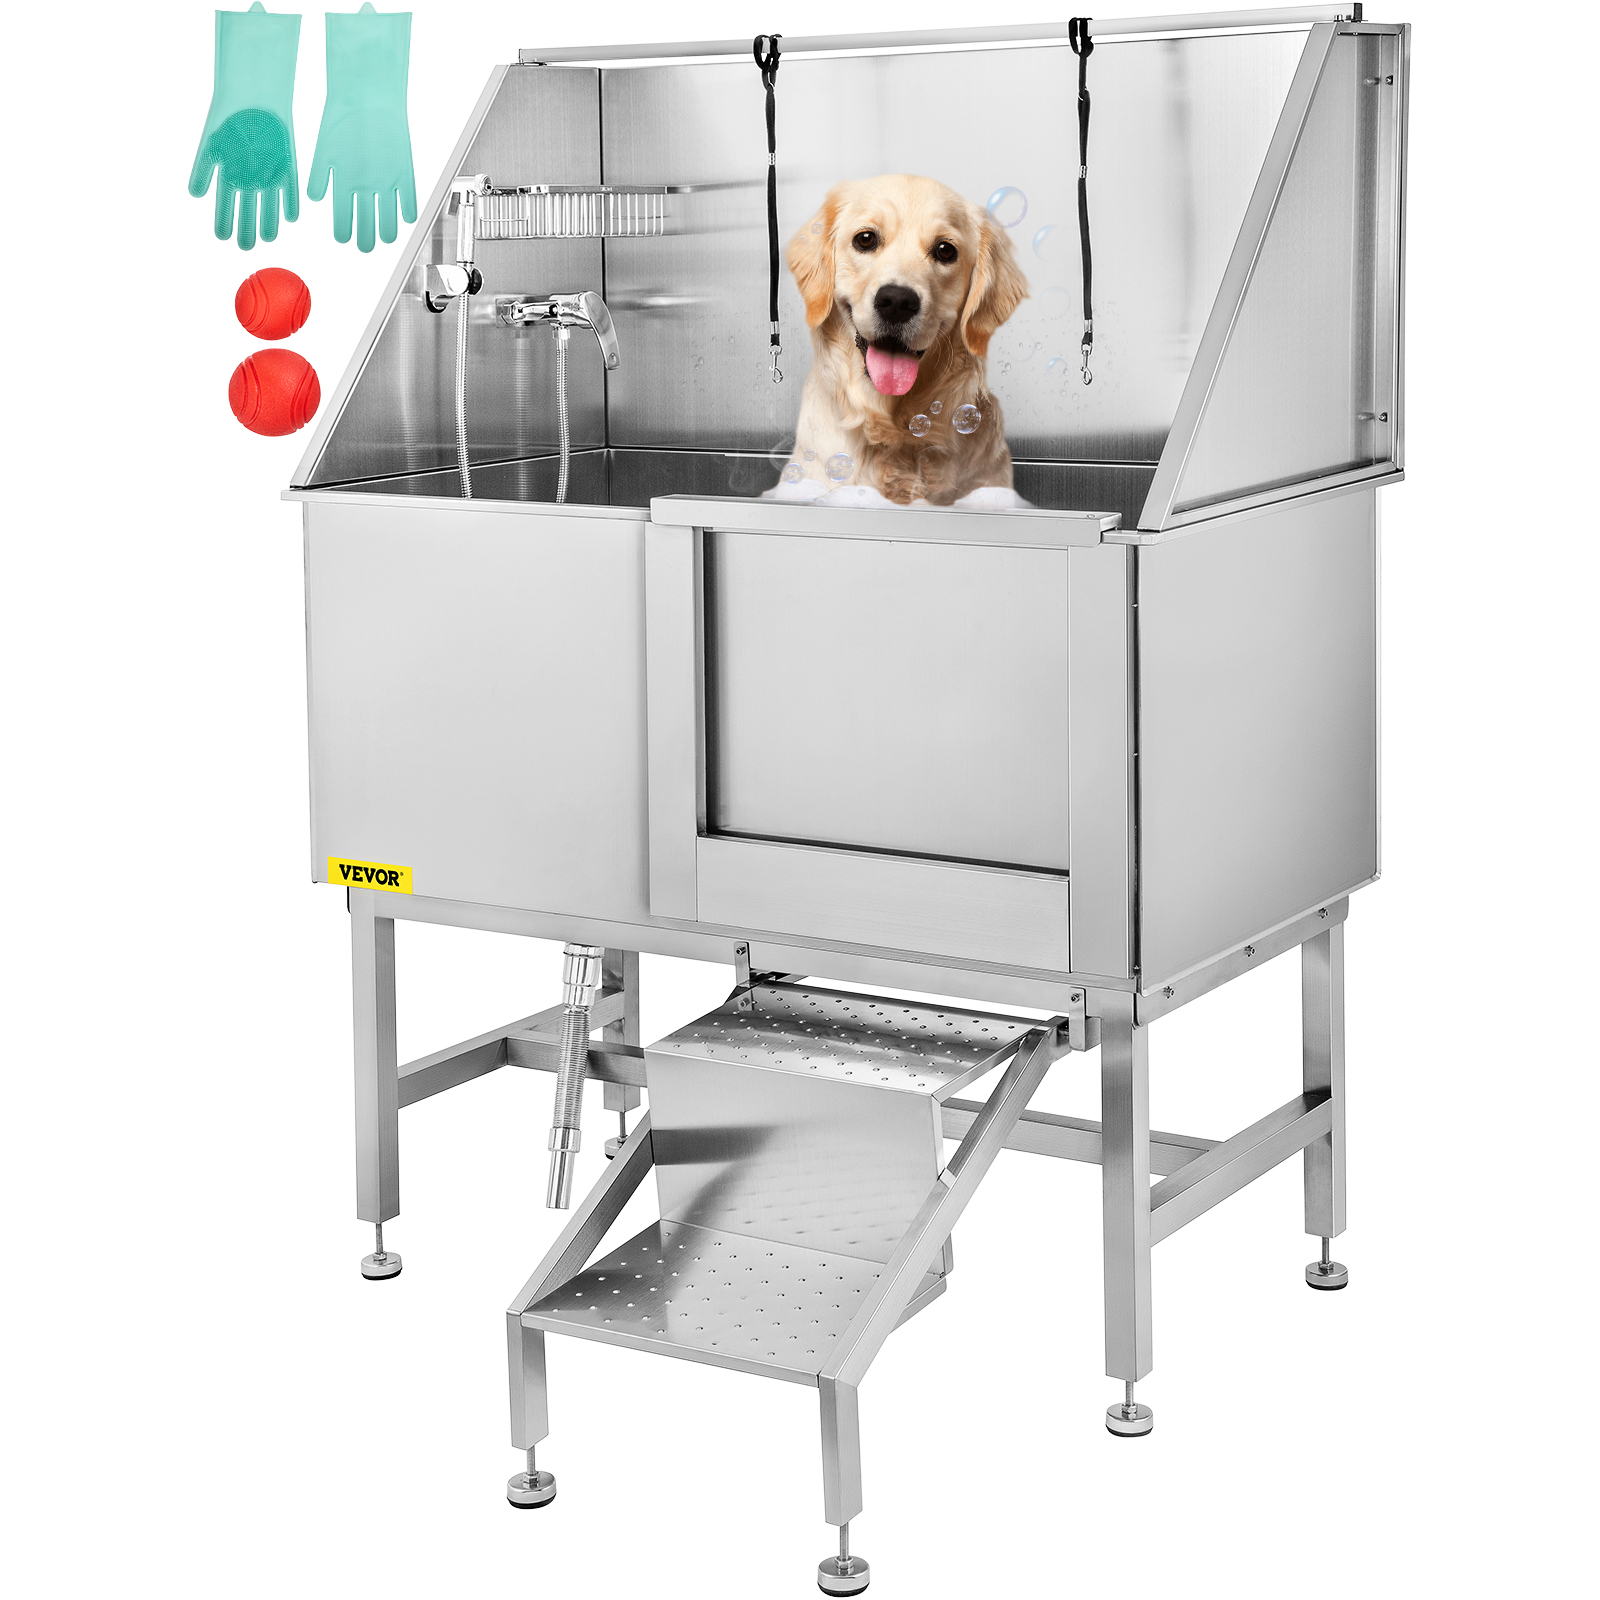 VEVOR Pet Grooming Tub Dog Cat Bath Tub 265 LBS Load Capacity Stainless Steel от Vevor Many GEOs